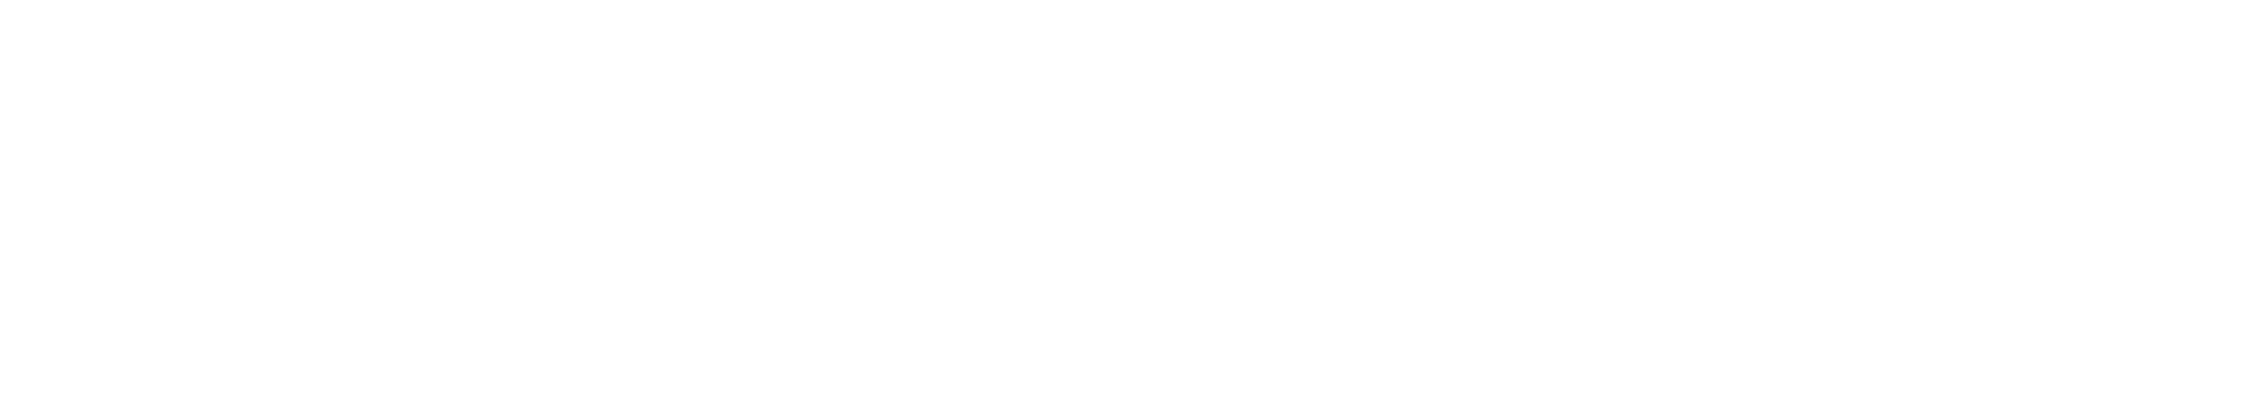 Shopify Partners Logo (as used by Shopify Development Partners)